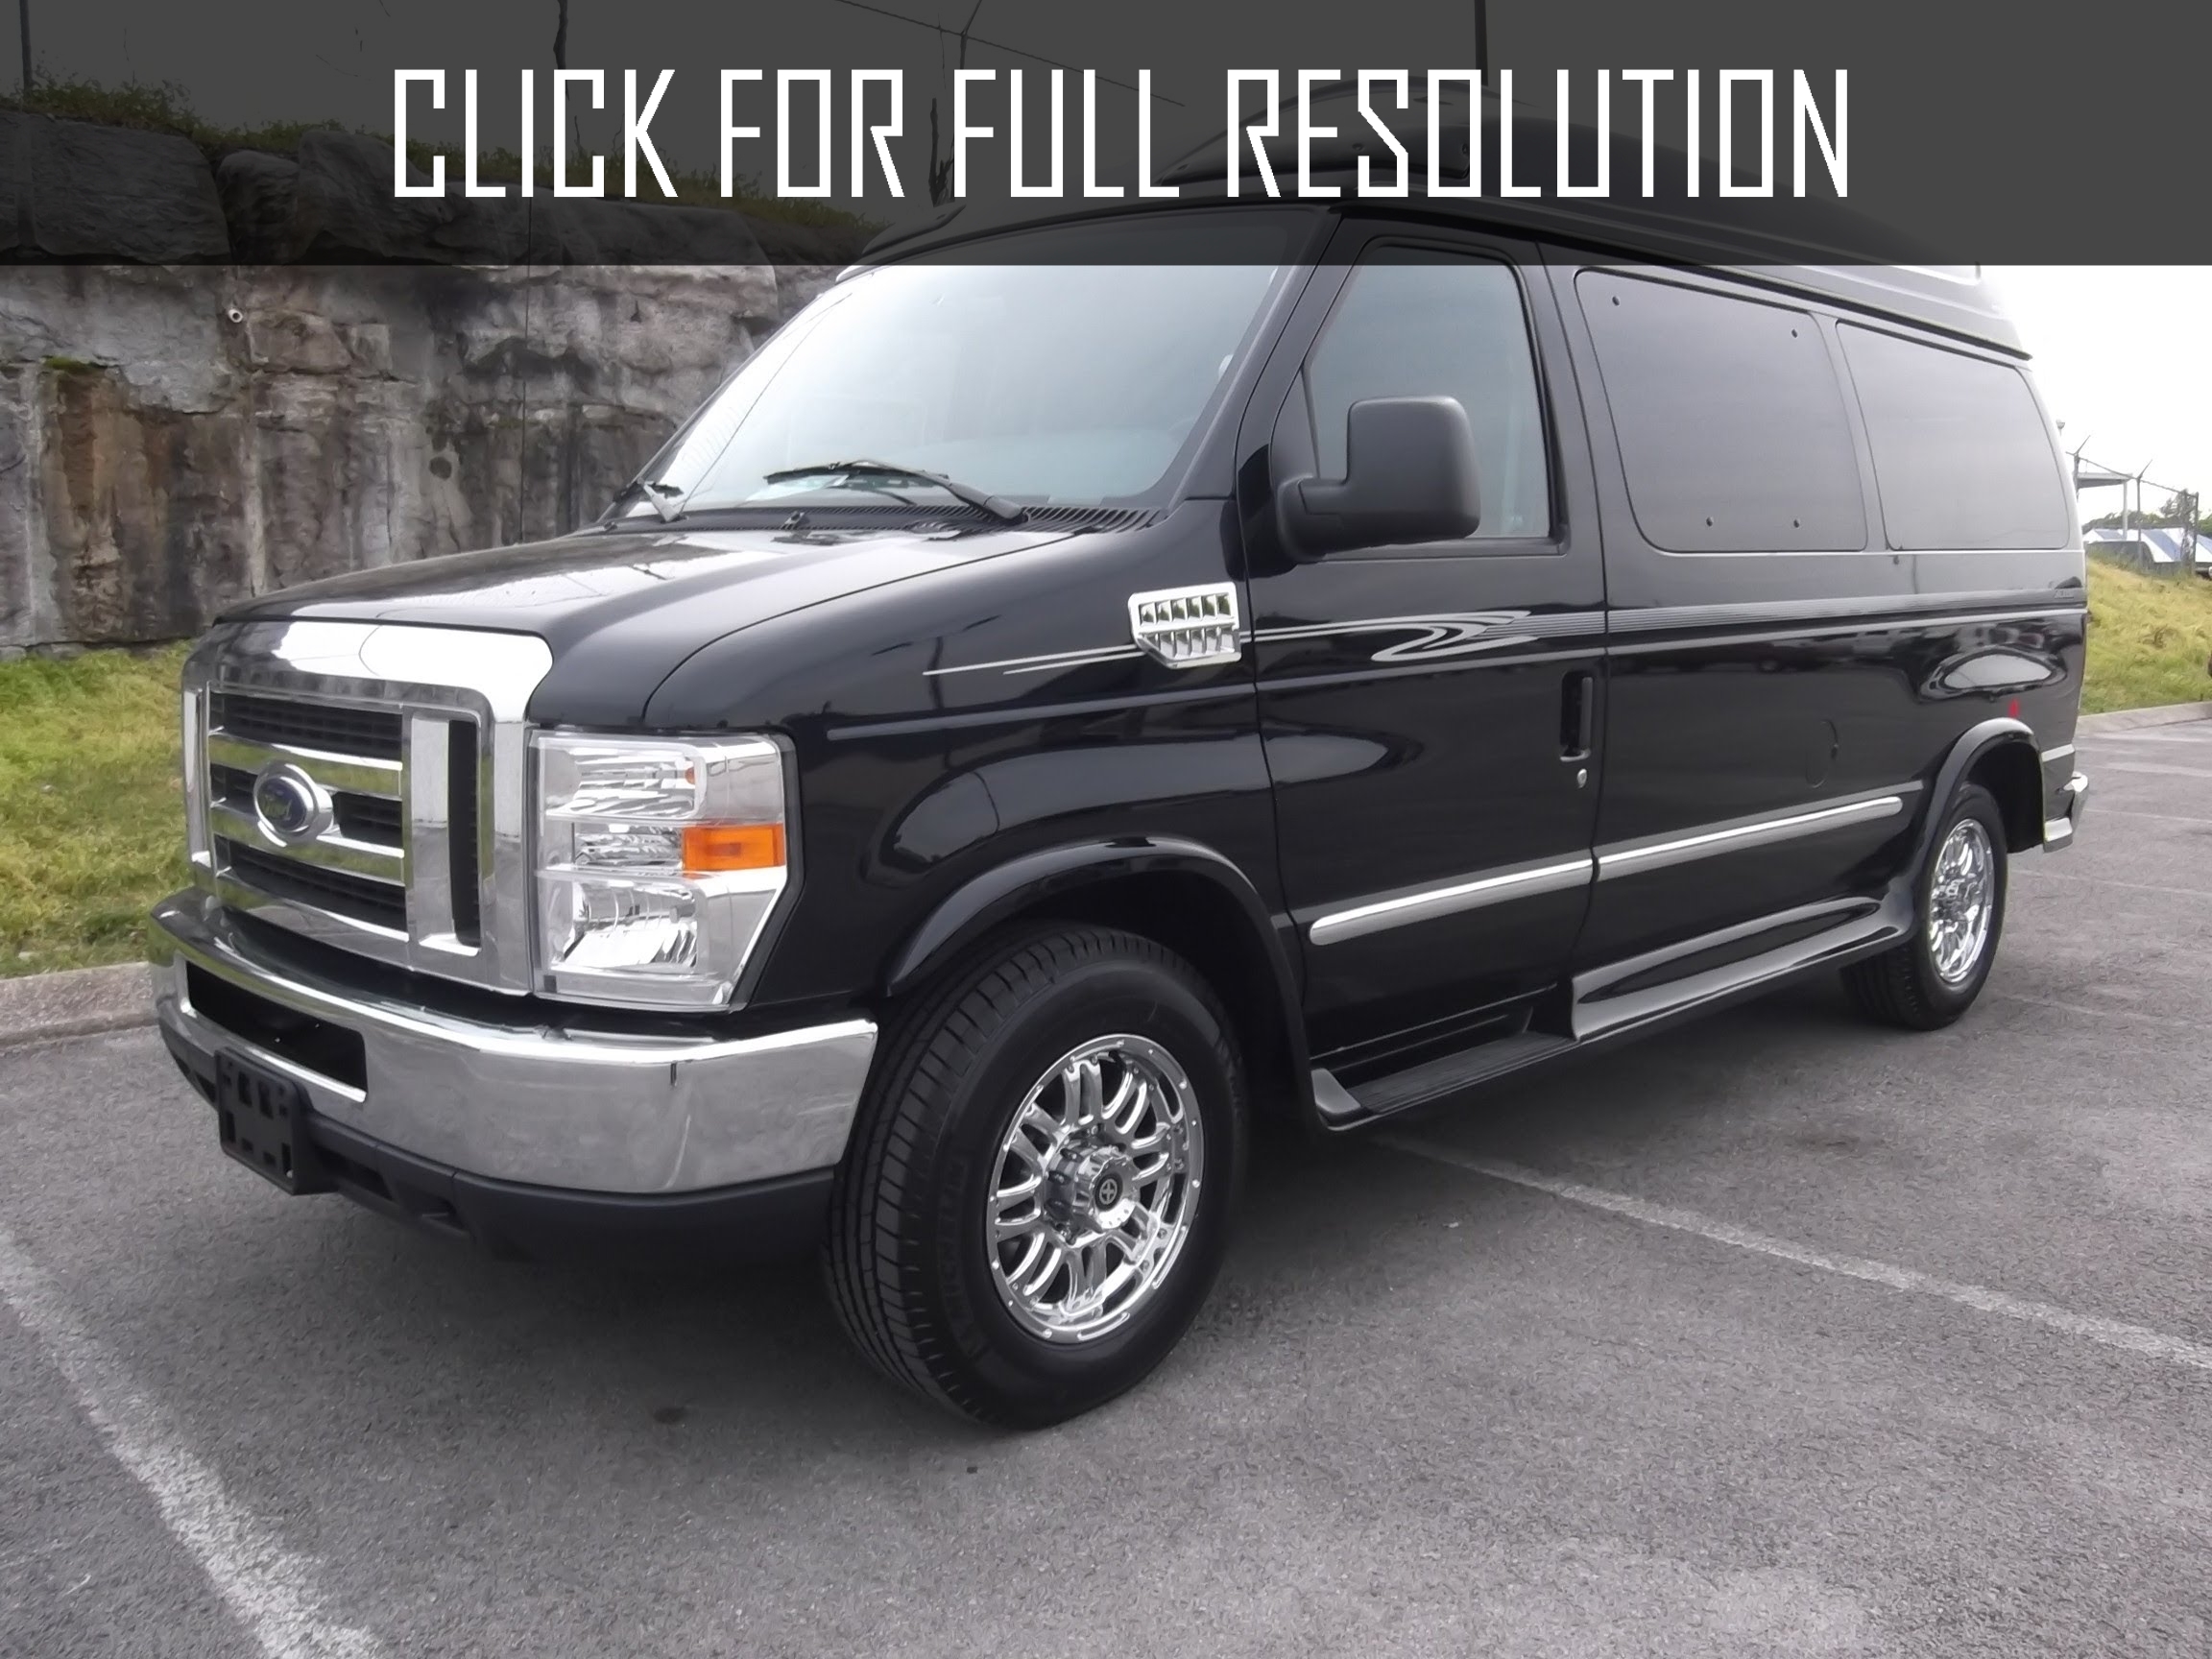 Ford E150 Conversion Van amazing photo gallery, some information and